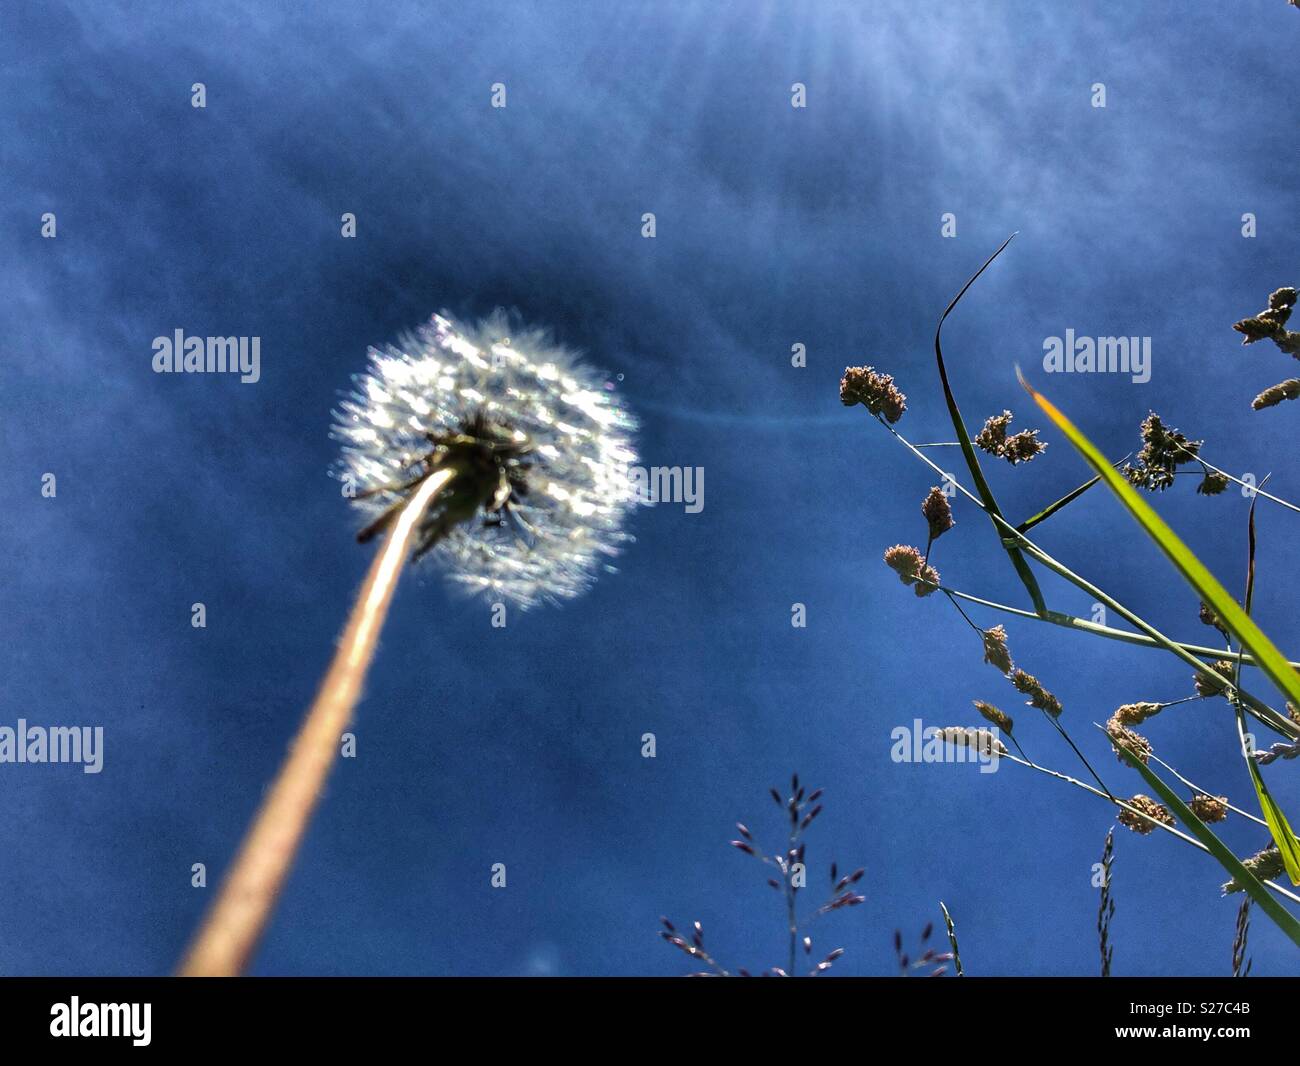 Dandelion seed head and grass photographed from below Stock Photo